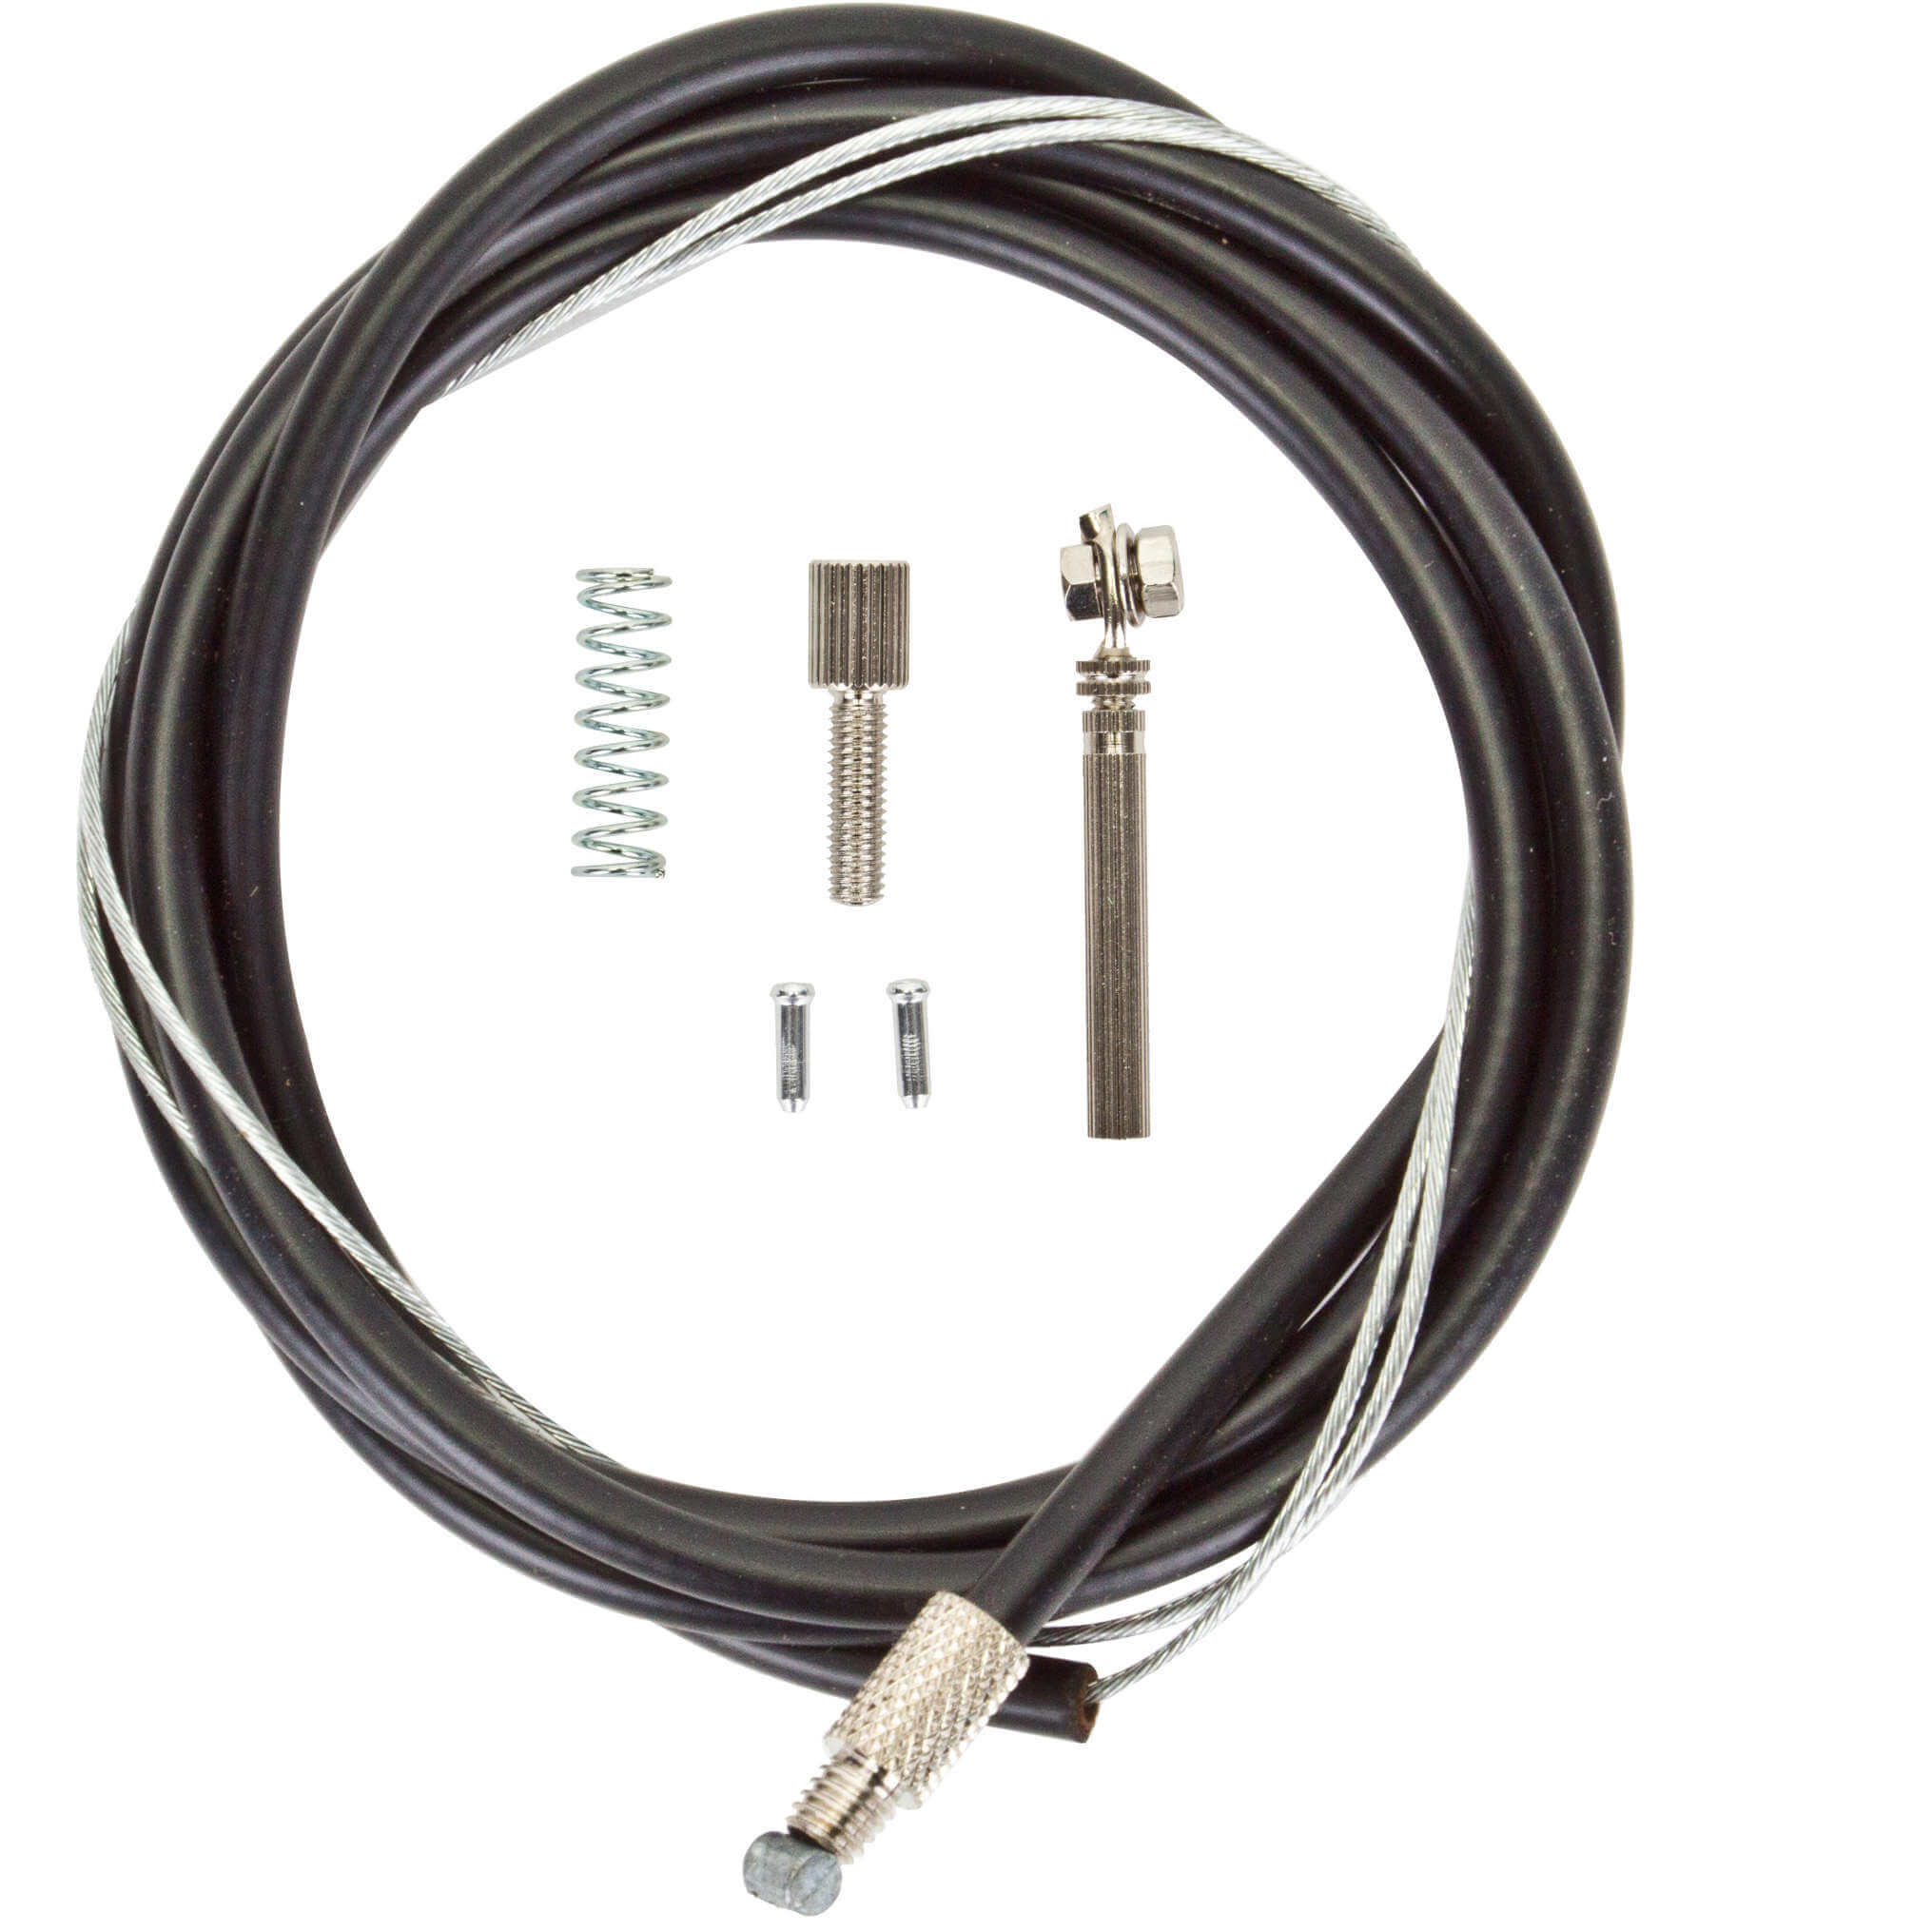 Sunlite Three Speed Shift Cable for Internal Shimano Hub - The Bikesmiths